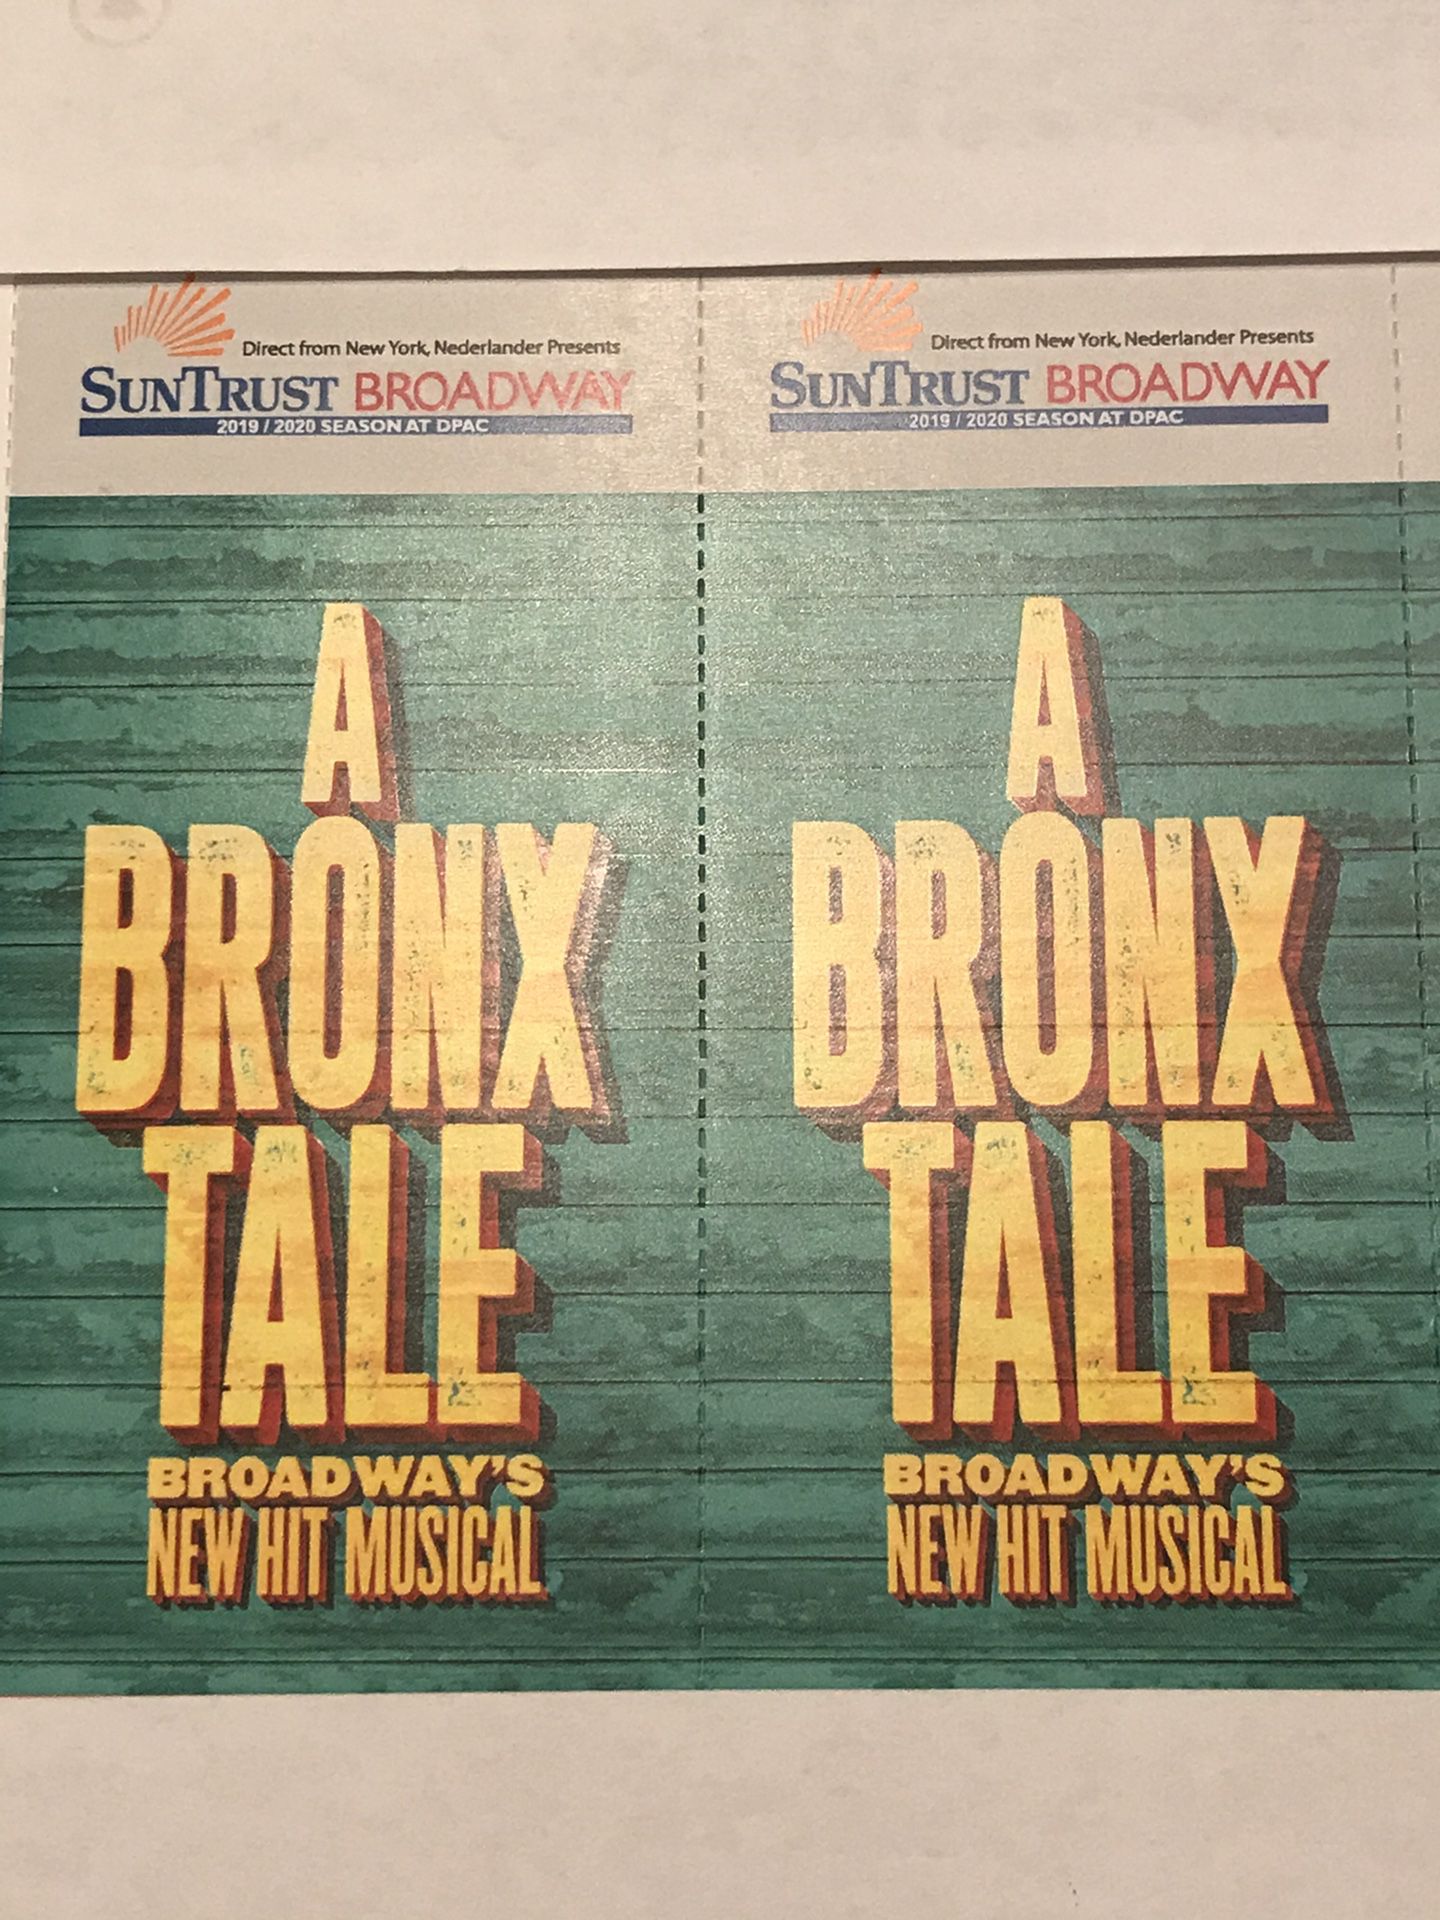 Tickets to “A Bronx Tale” touring Broadway musical